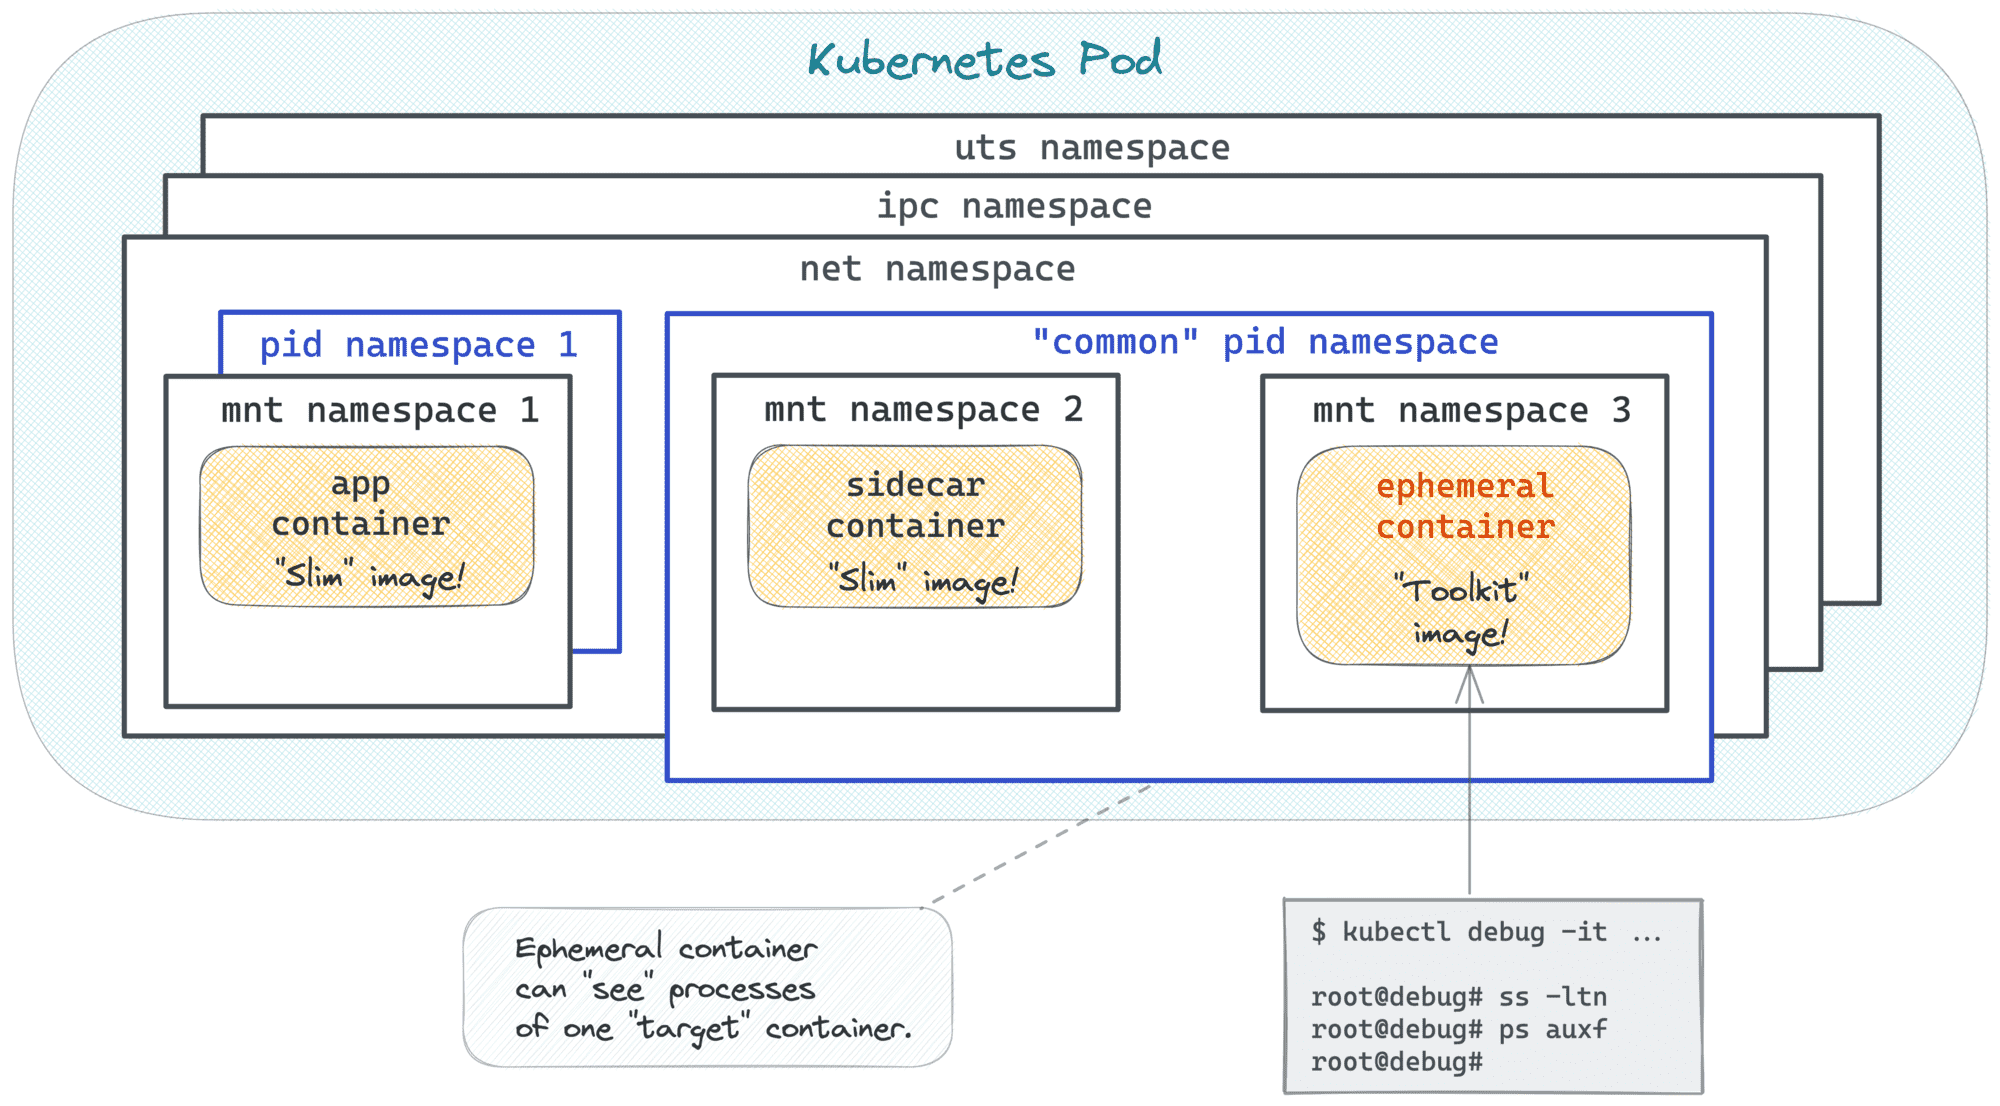 Kubernetes Ephemeral Container using target container.